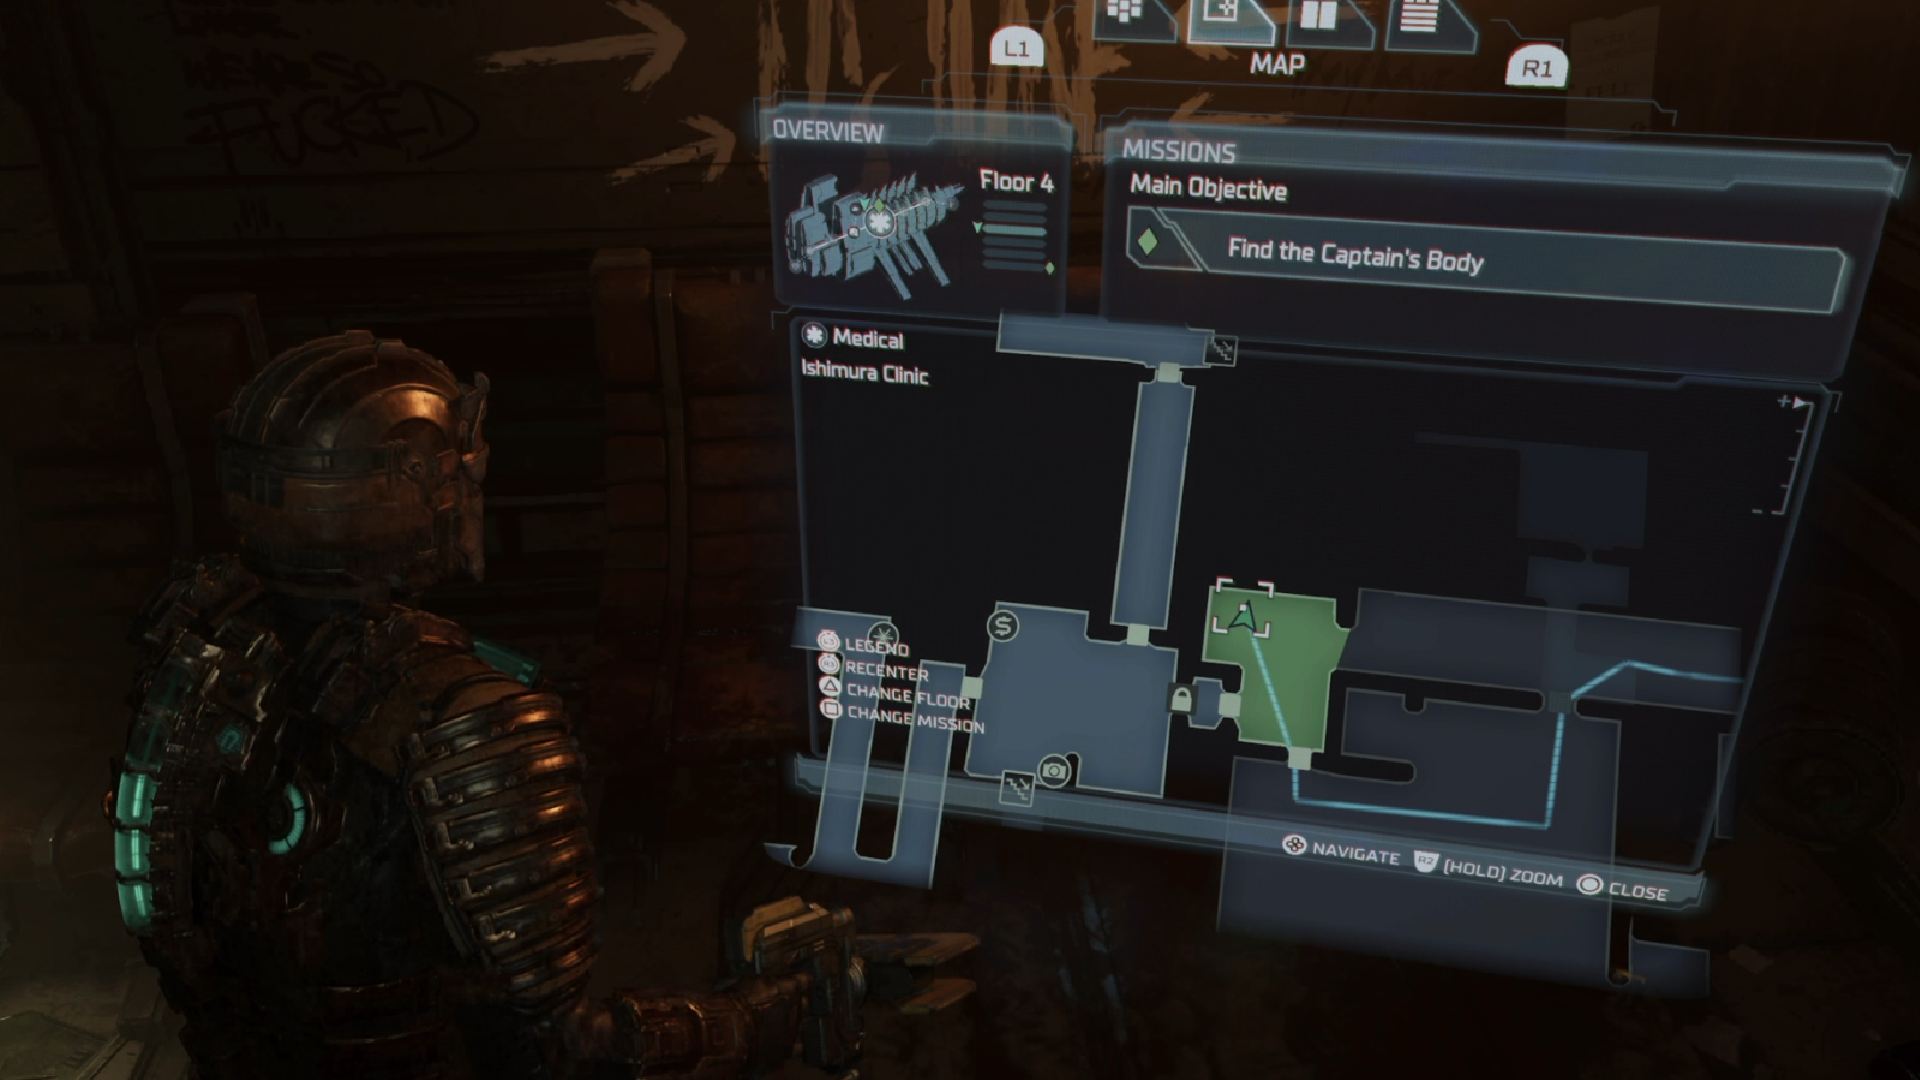 Dead Space Weapon Upgrades: The weapon upgrade location can be seen